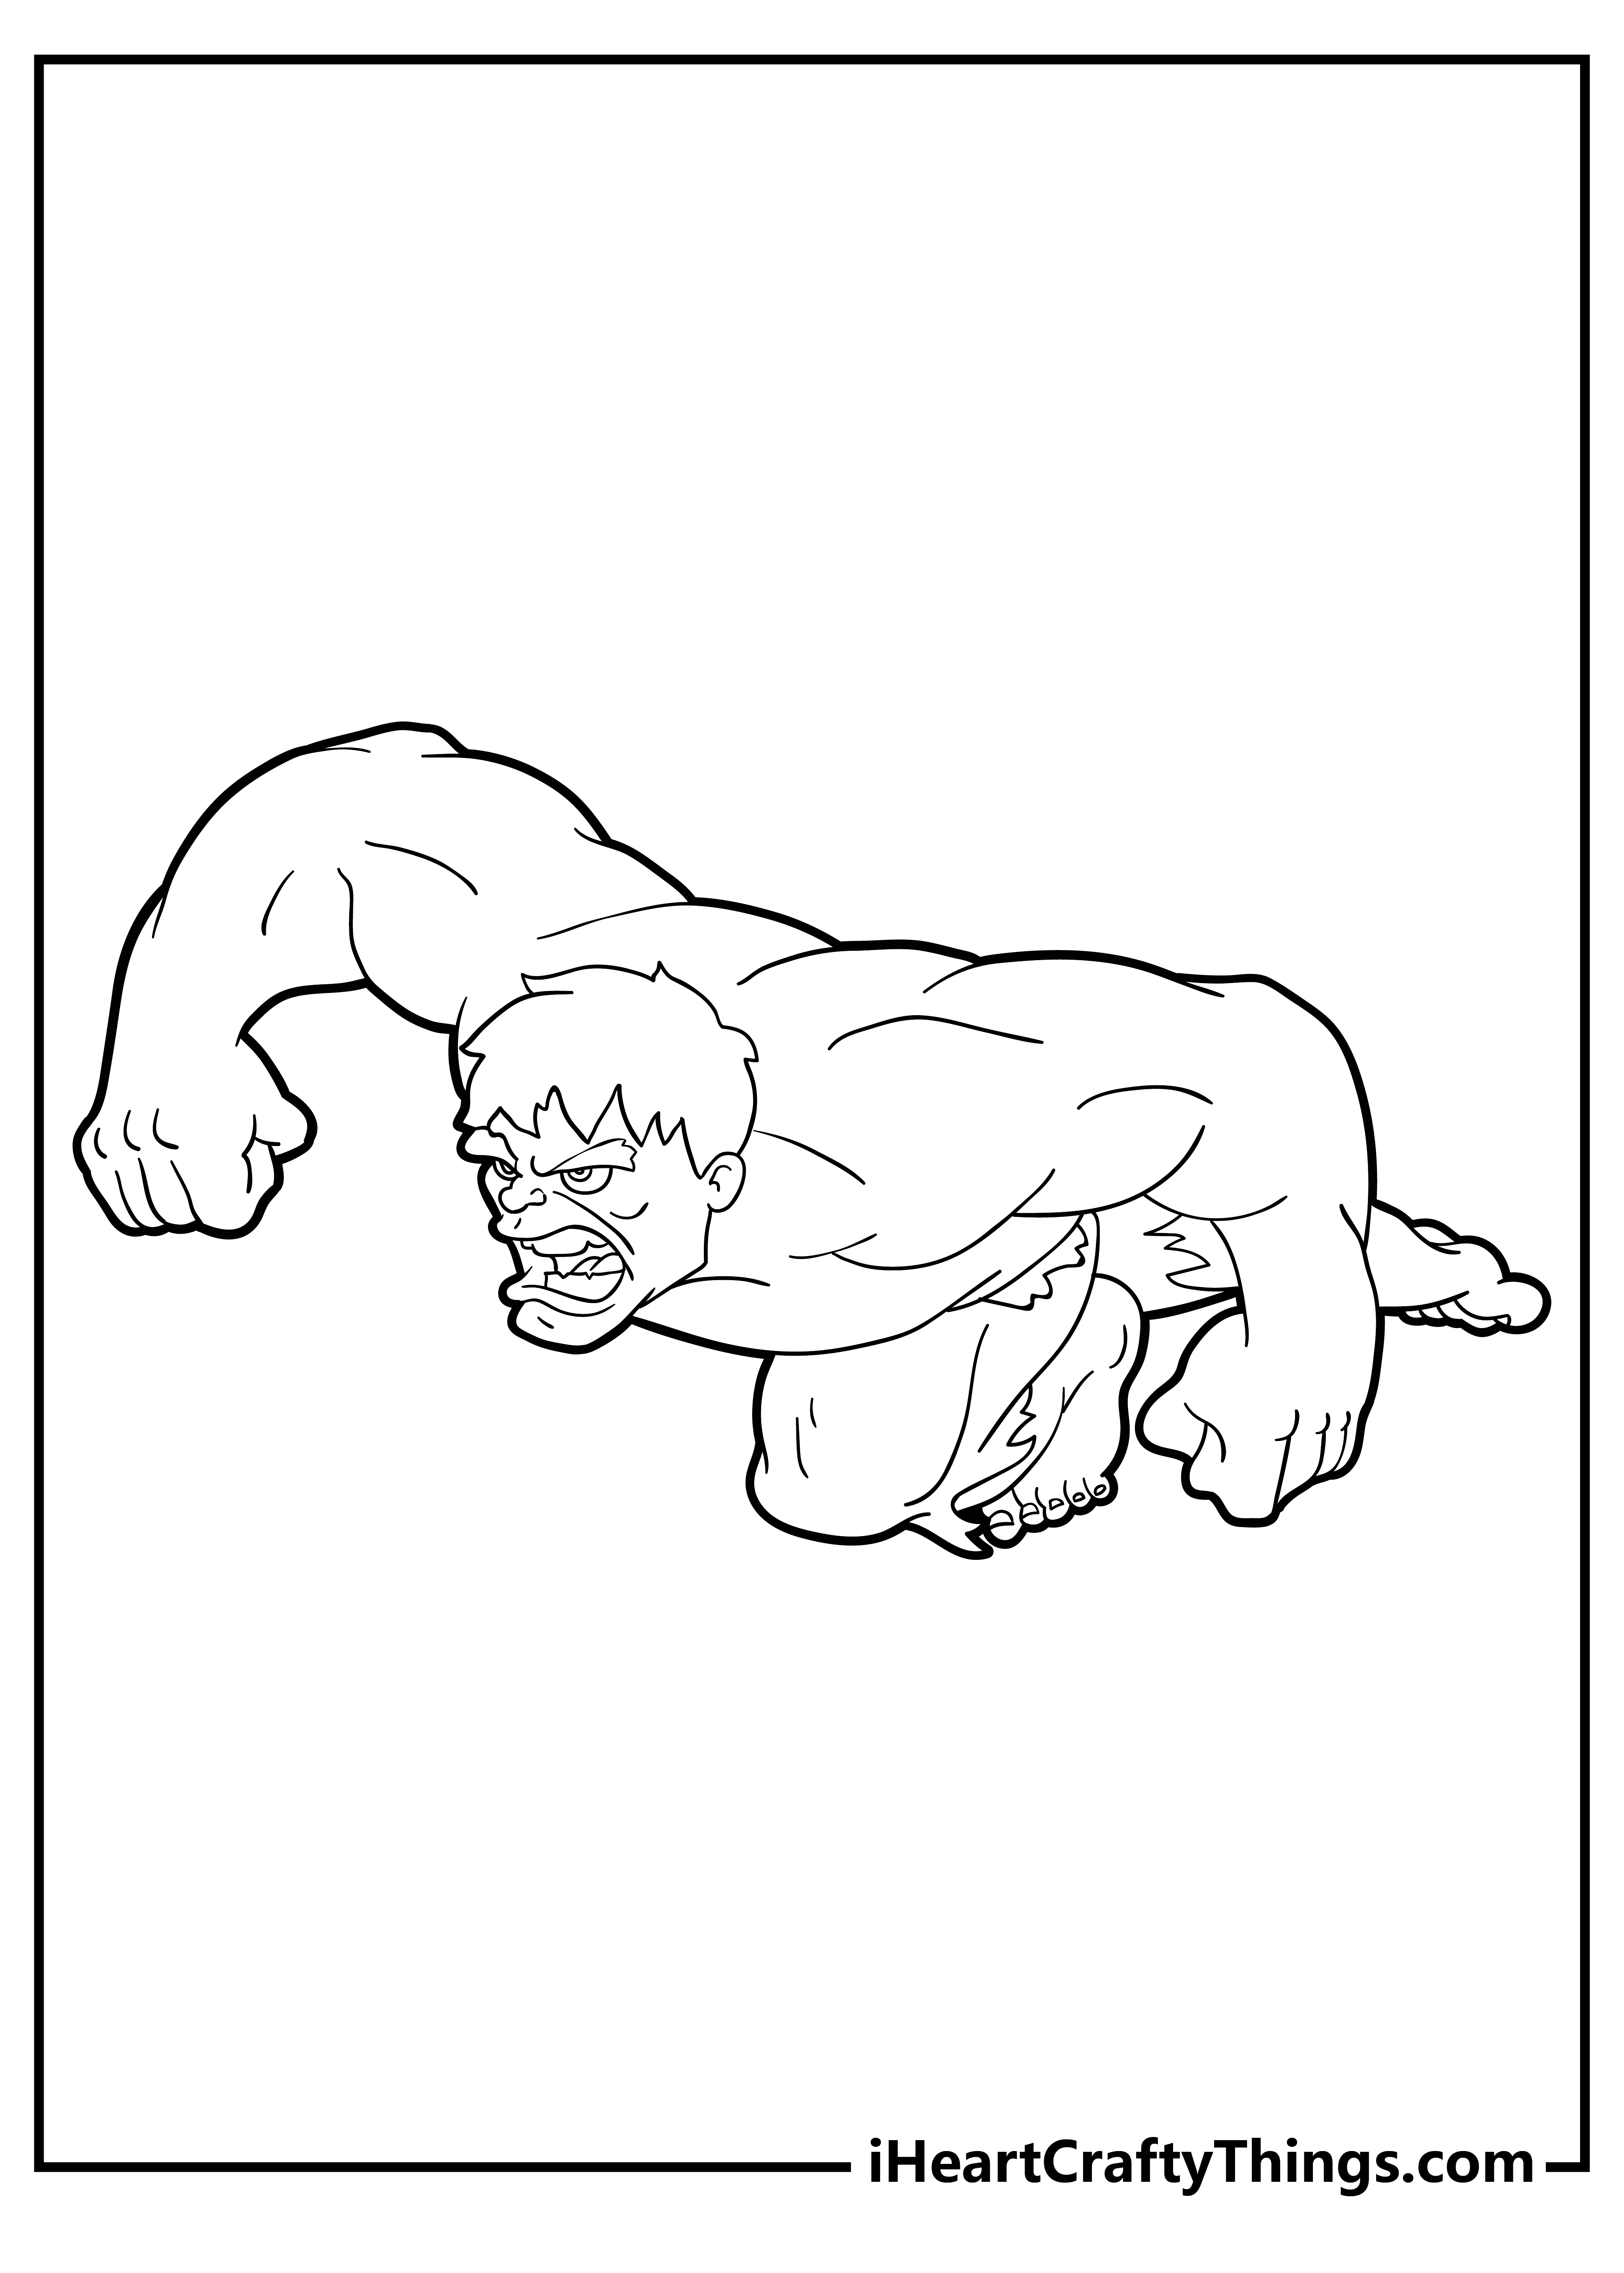 Hulk Coloring Pages for preschoolers free printable